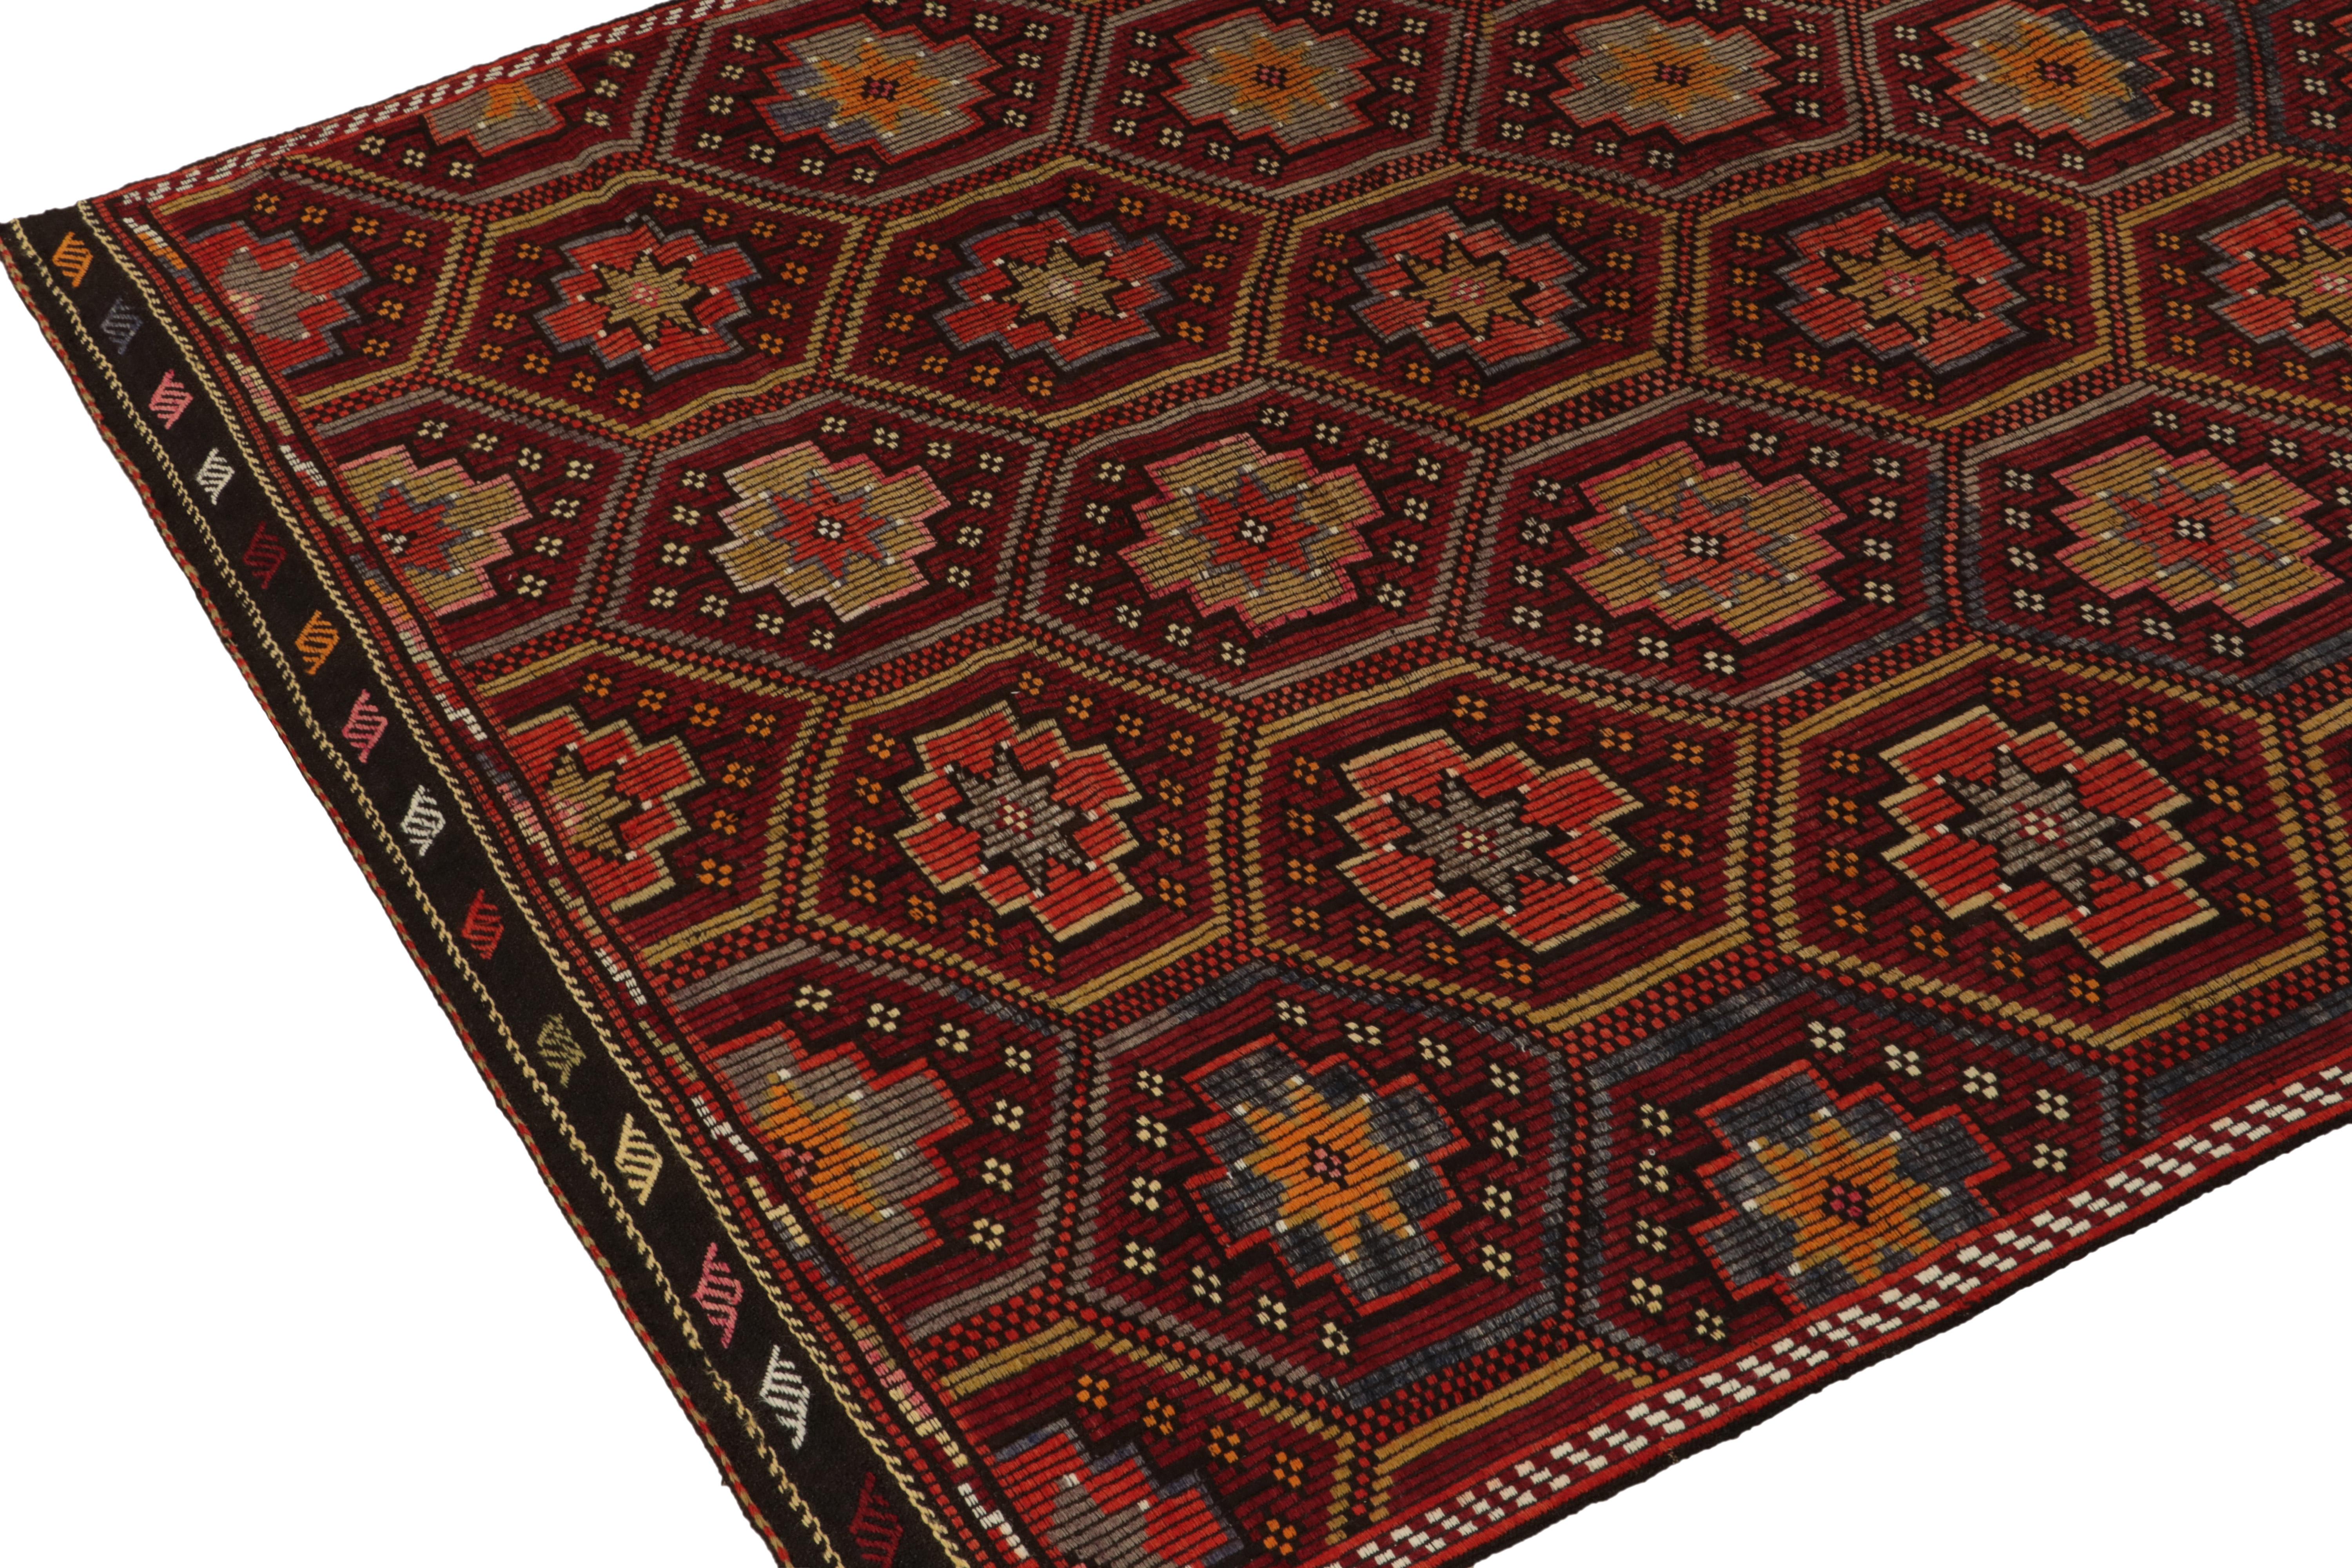 Vintage Cecim Kilim Rug in Red and Gold Tribal Geometric Pattern by Rug & Kilim In Good Condition For Sale In Long Island City, NY